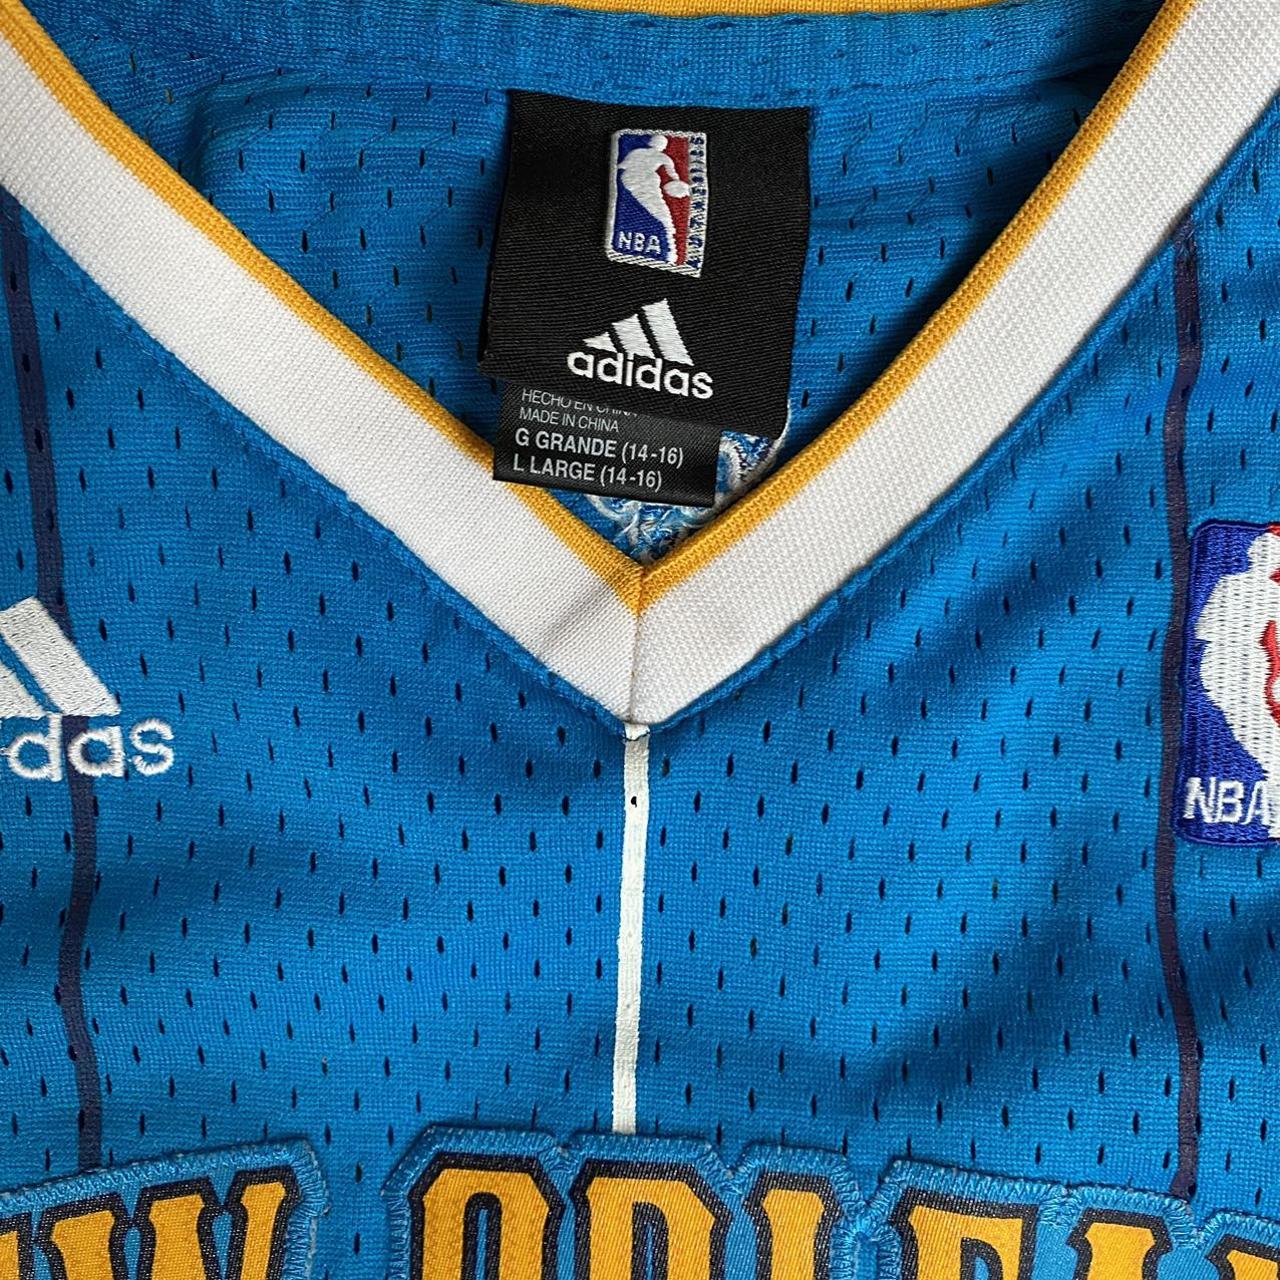 adidas, Other, New Orleans Pelicans Chris Paul Jersey For Kids Large